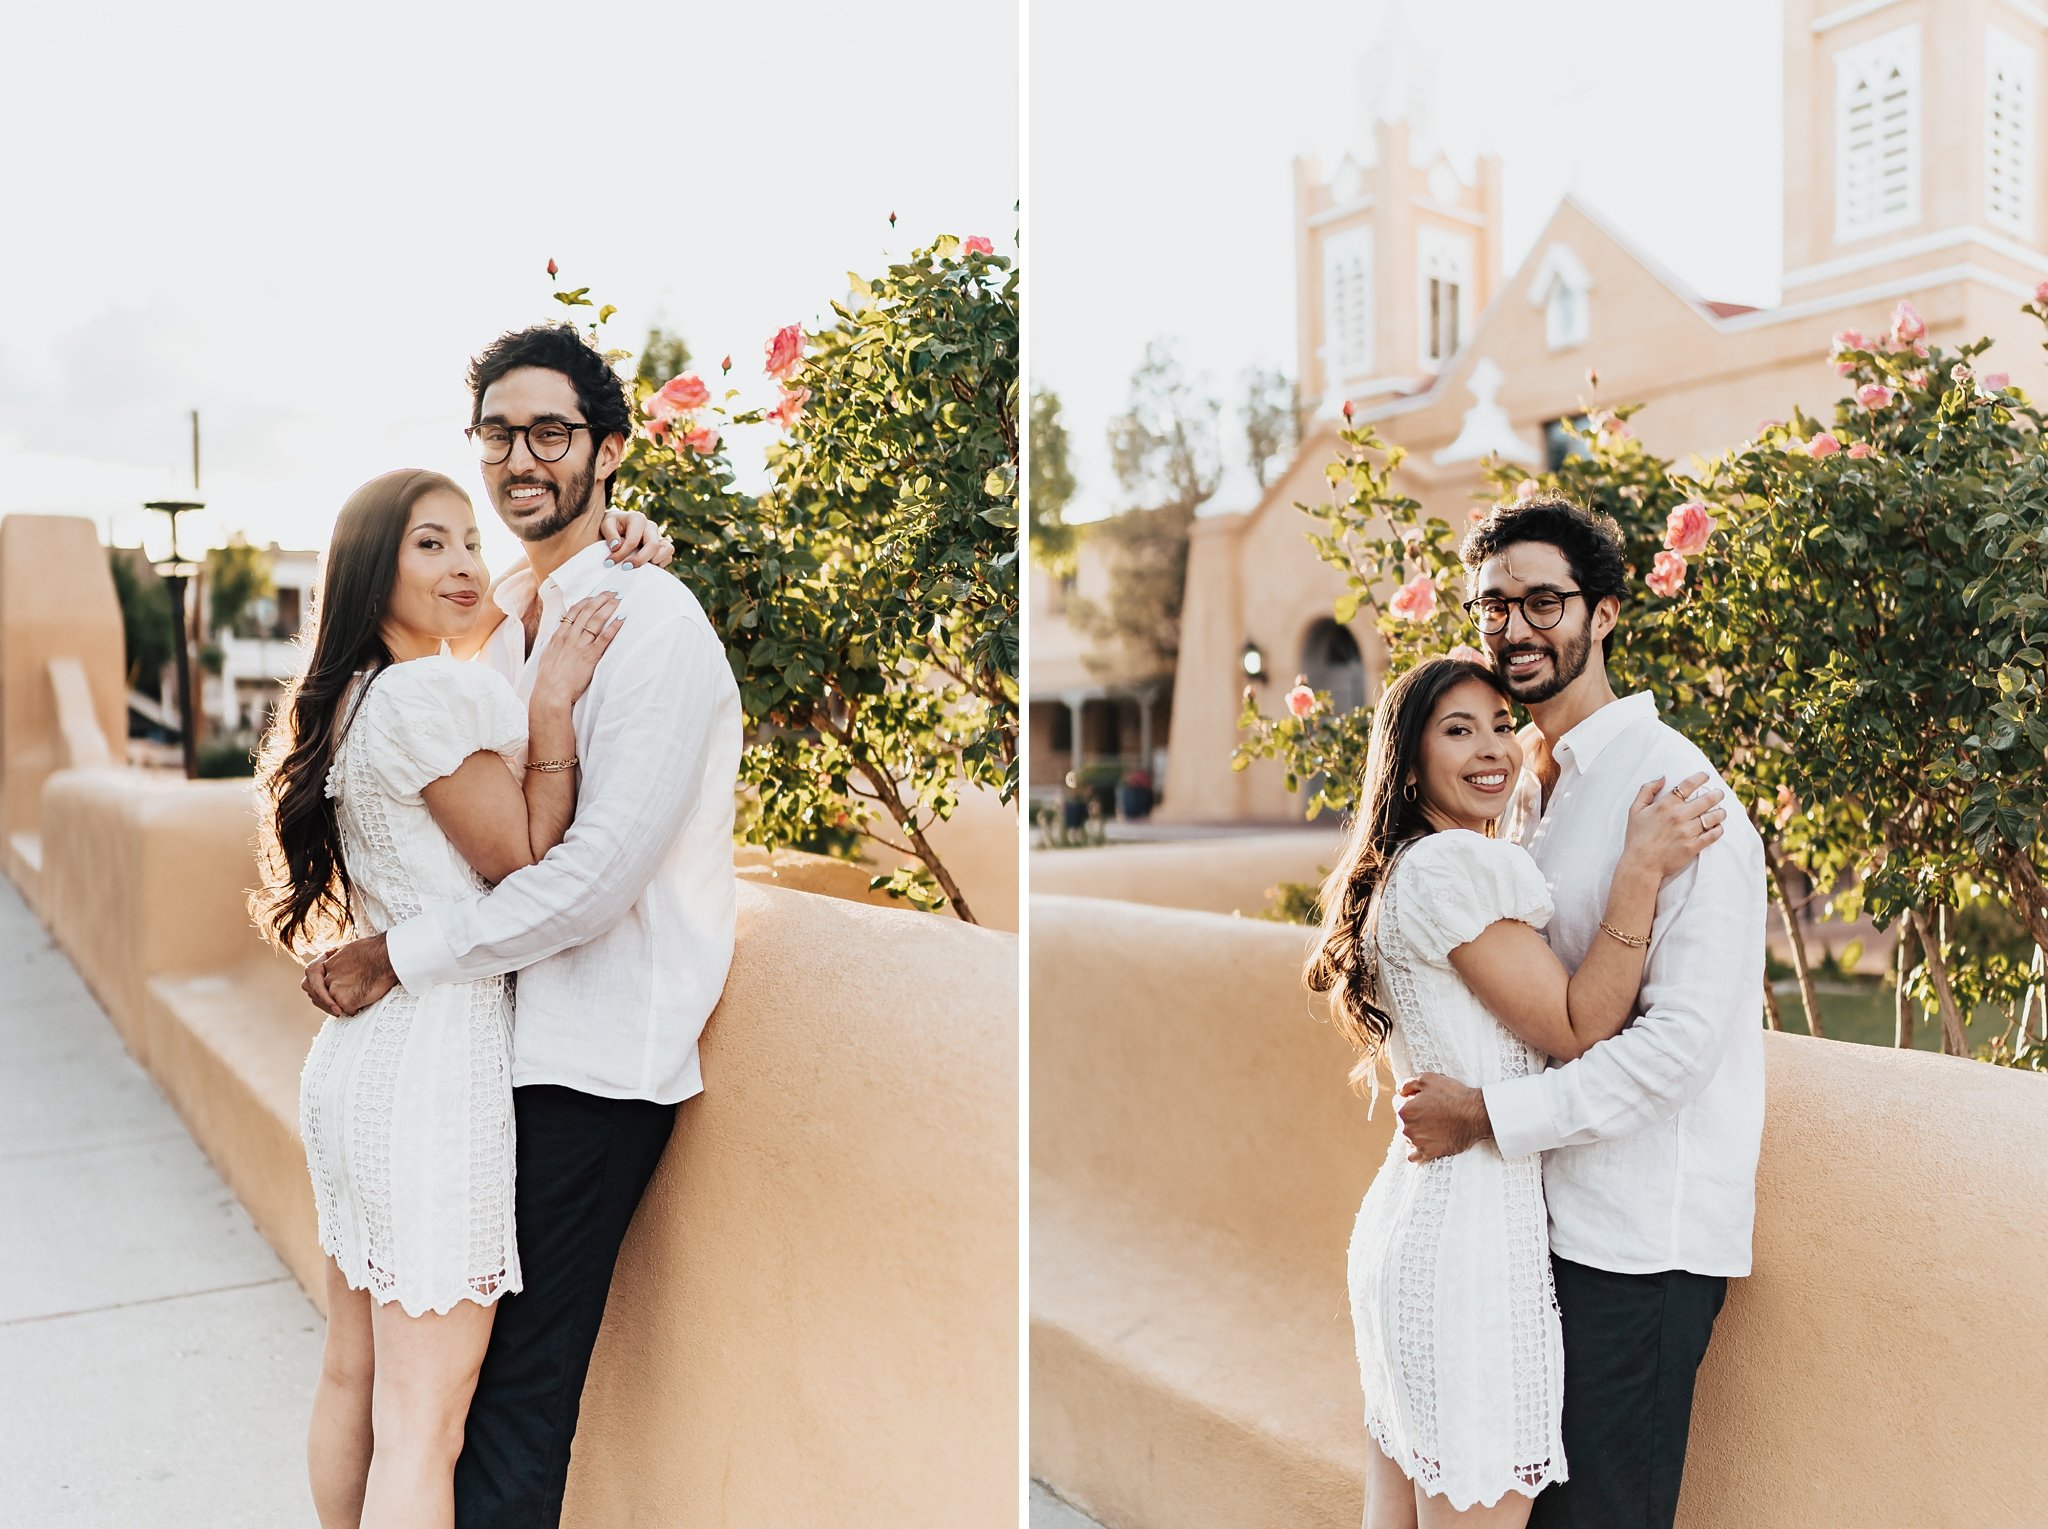 Alicia+lucia+photography+-+albuquerque+wedding+photographer+-+santa+fe+wedding+photography+-+new+mexico+wedding+photographer+-+new+mexico+wedding+-+old+town+engagement+-+old+town+wedding+-+southwest+engagement_0014.jpg